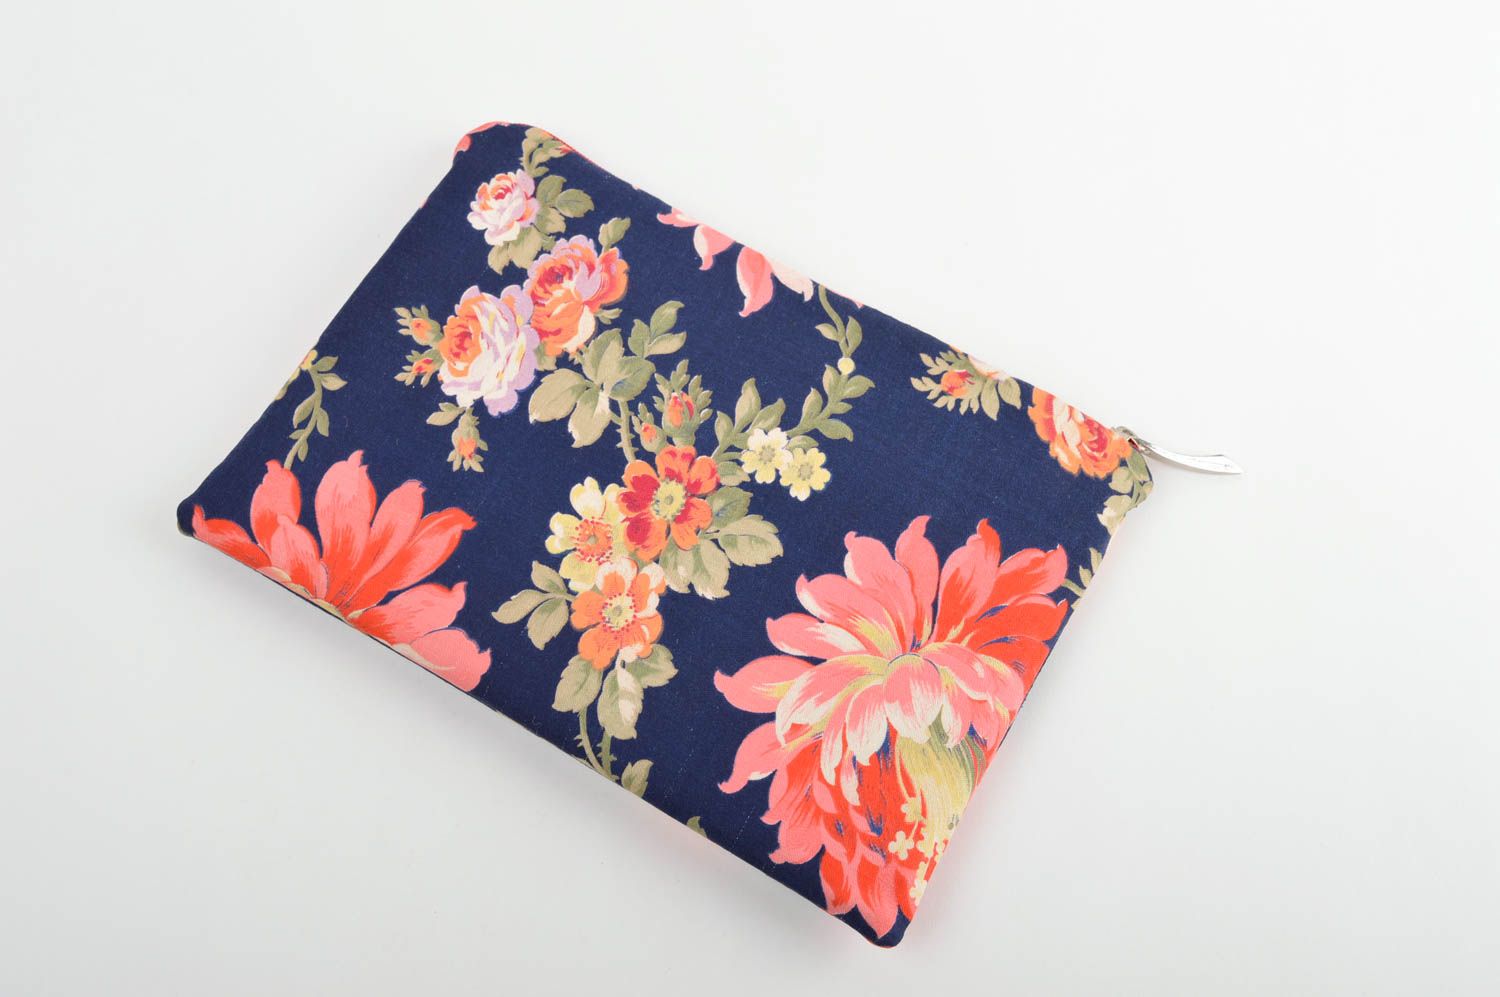 Handmade fabric purse stylish clutch bag womens luxury bags cool gifts for her photo 2